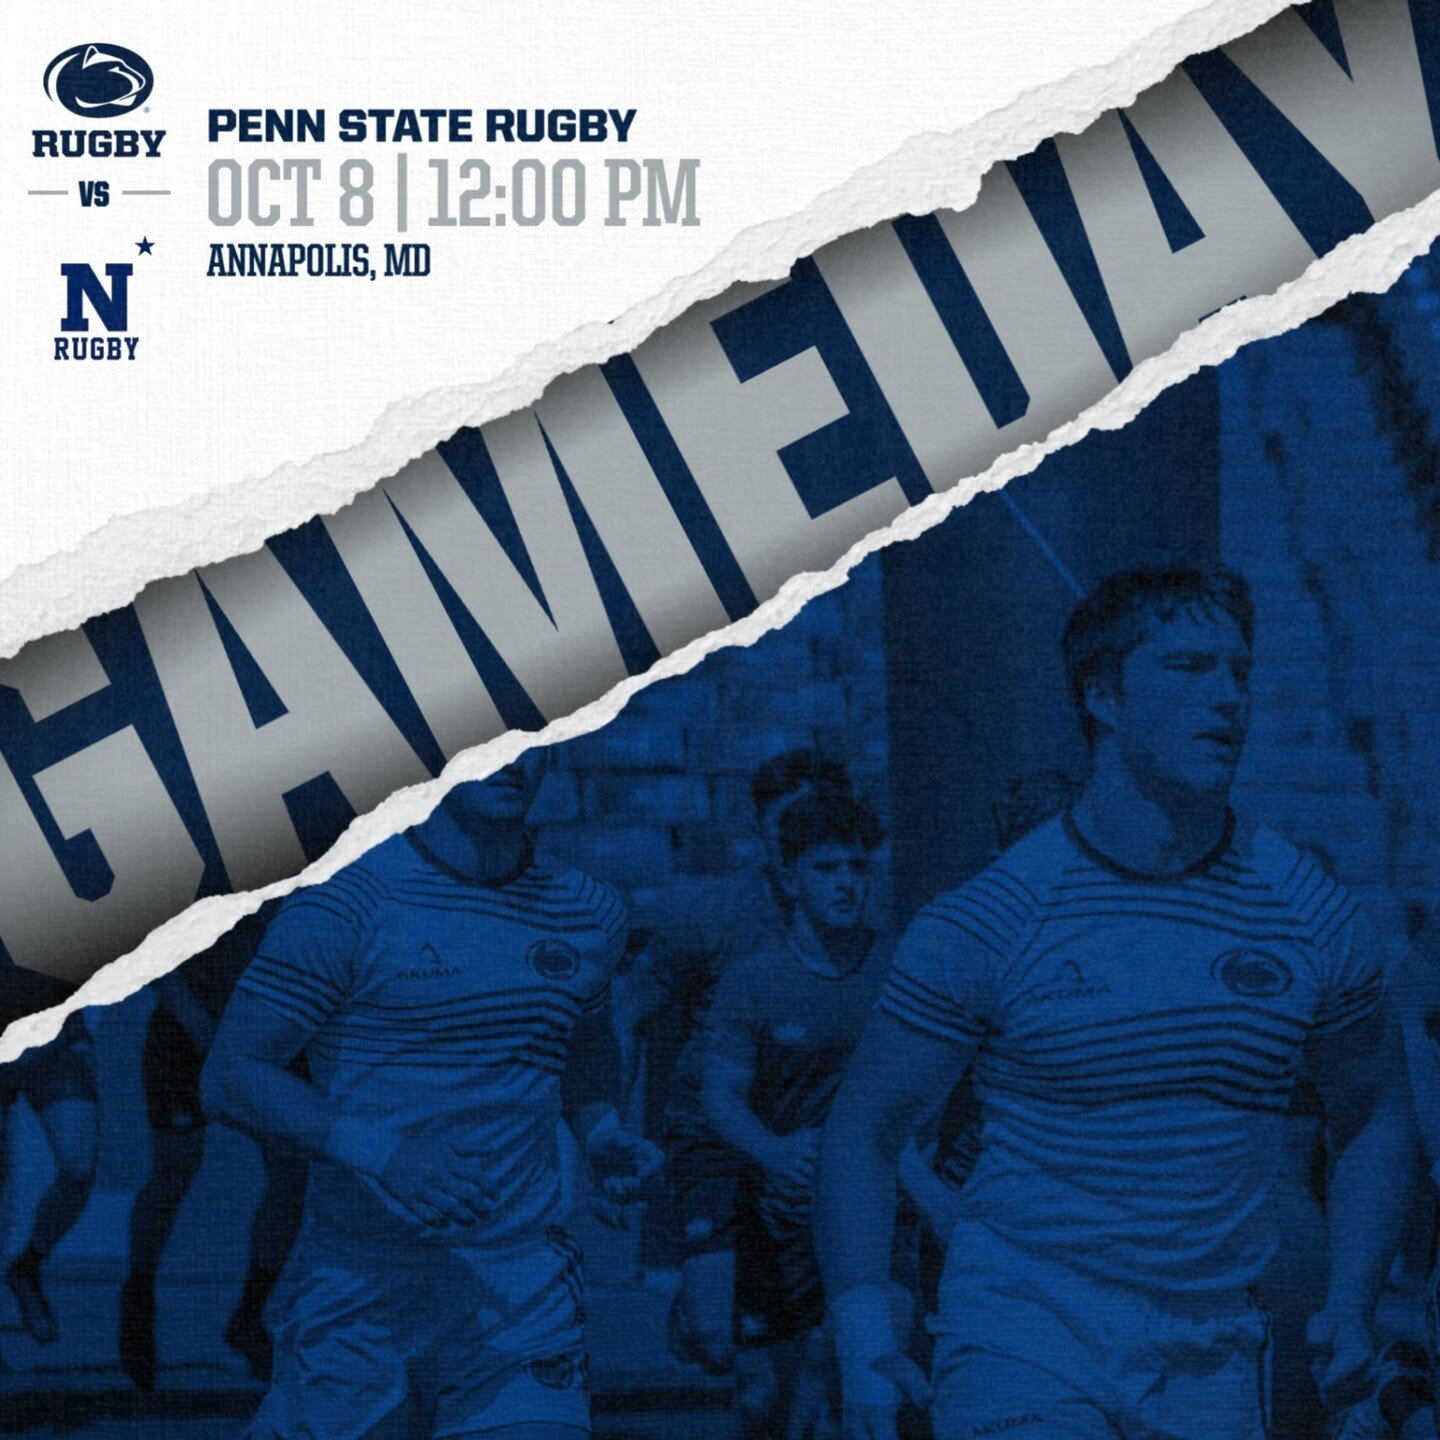 It's Game Day!! Check out Navy Rugby Facebook for the livestream of today's Match.